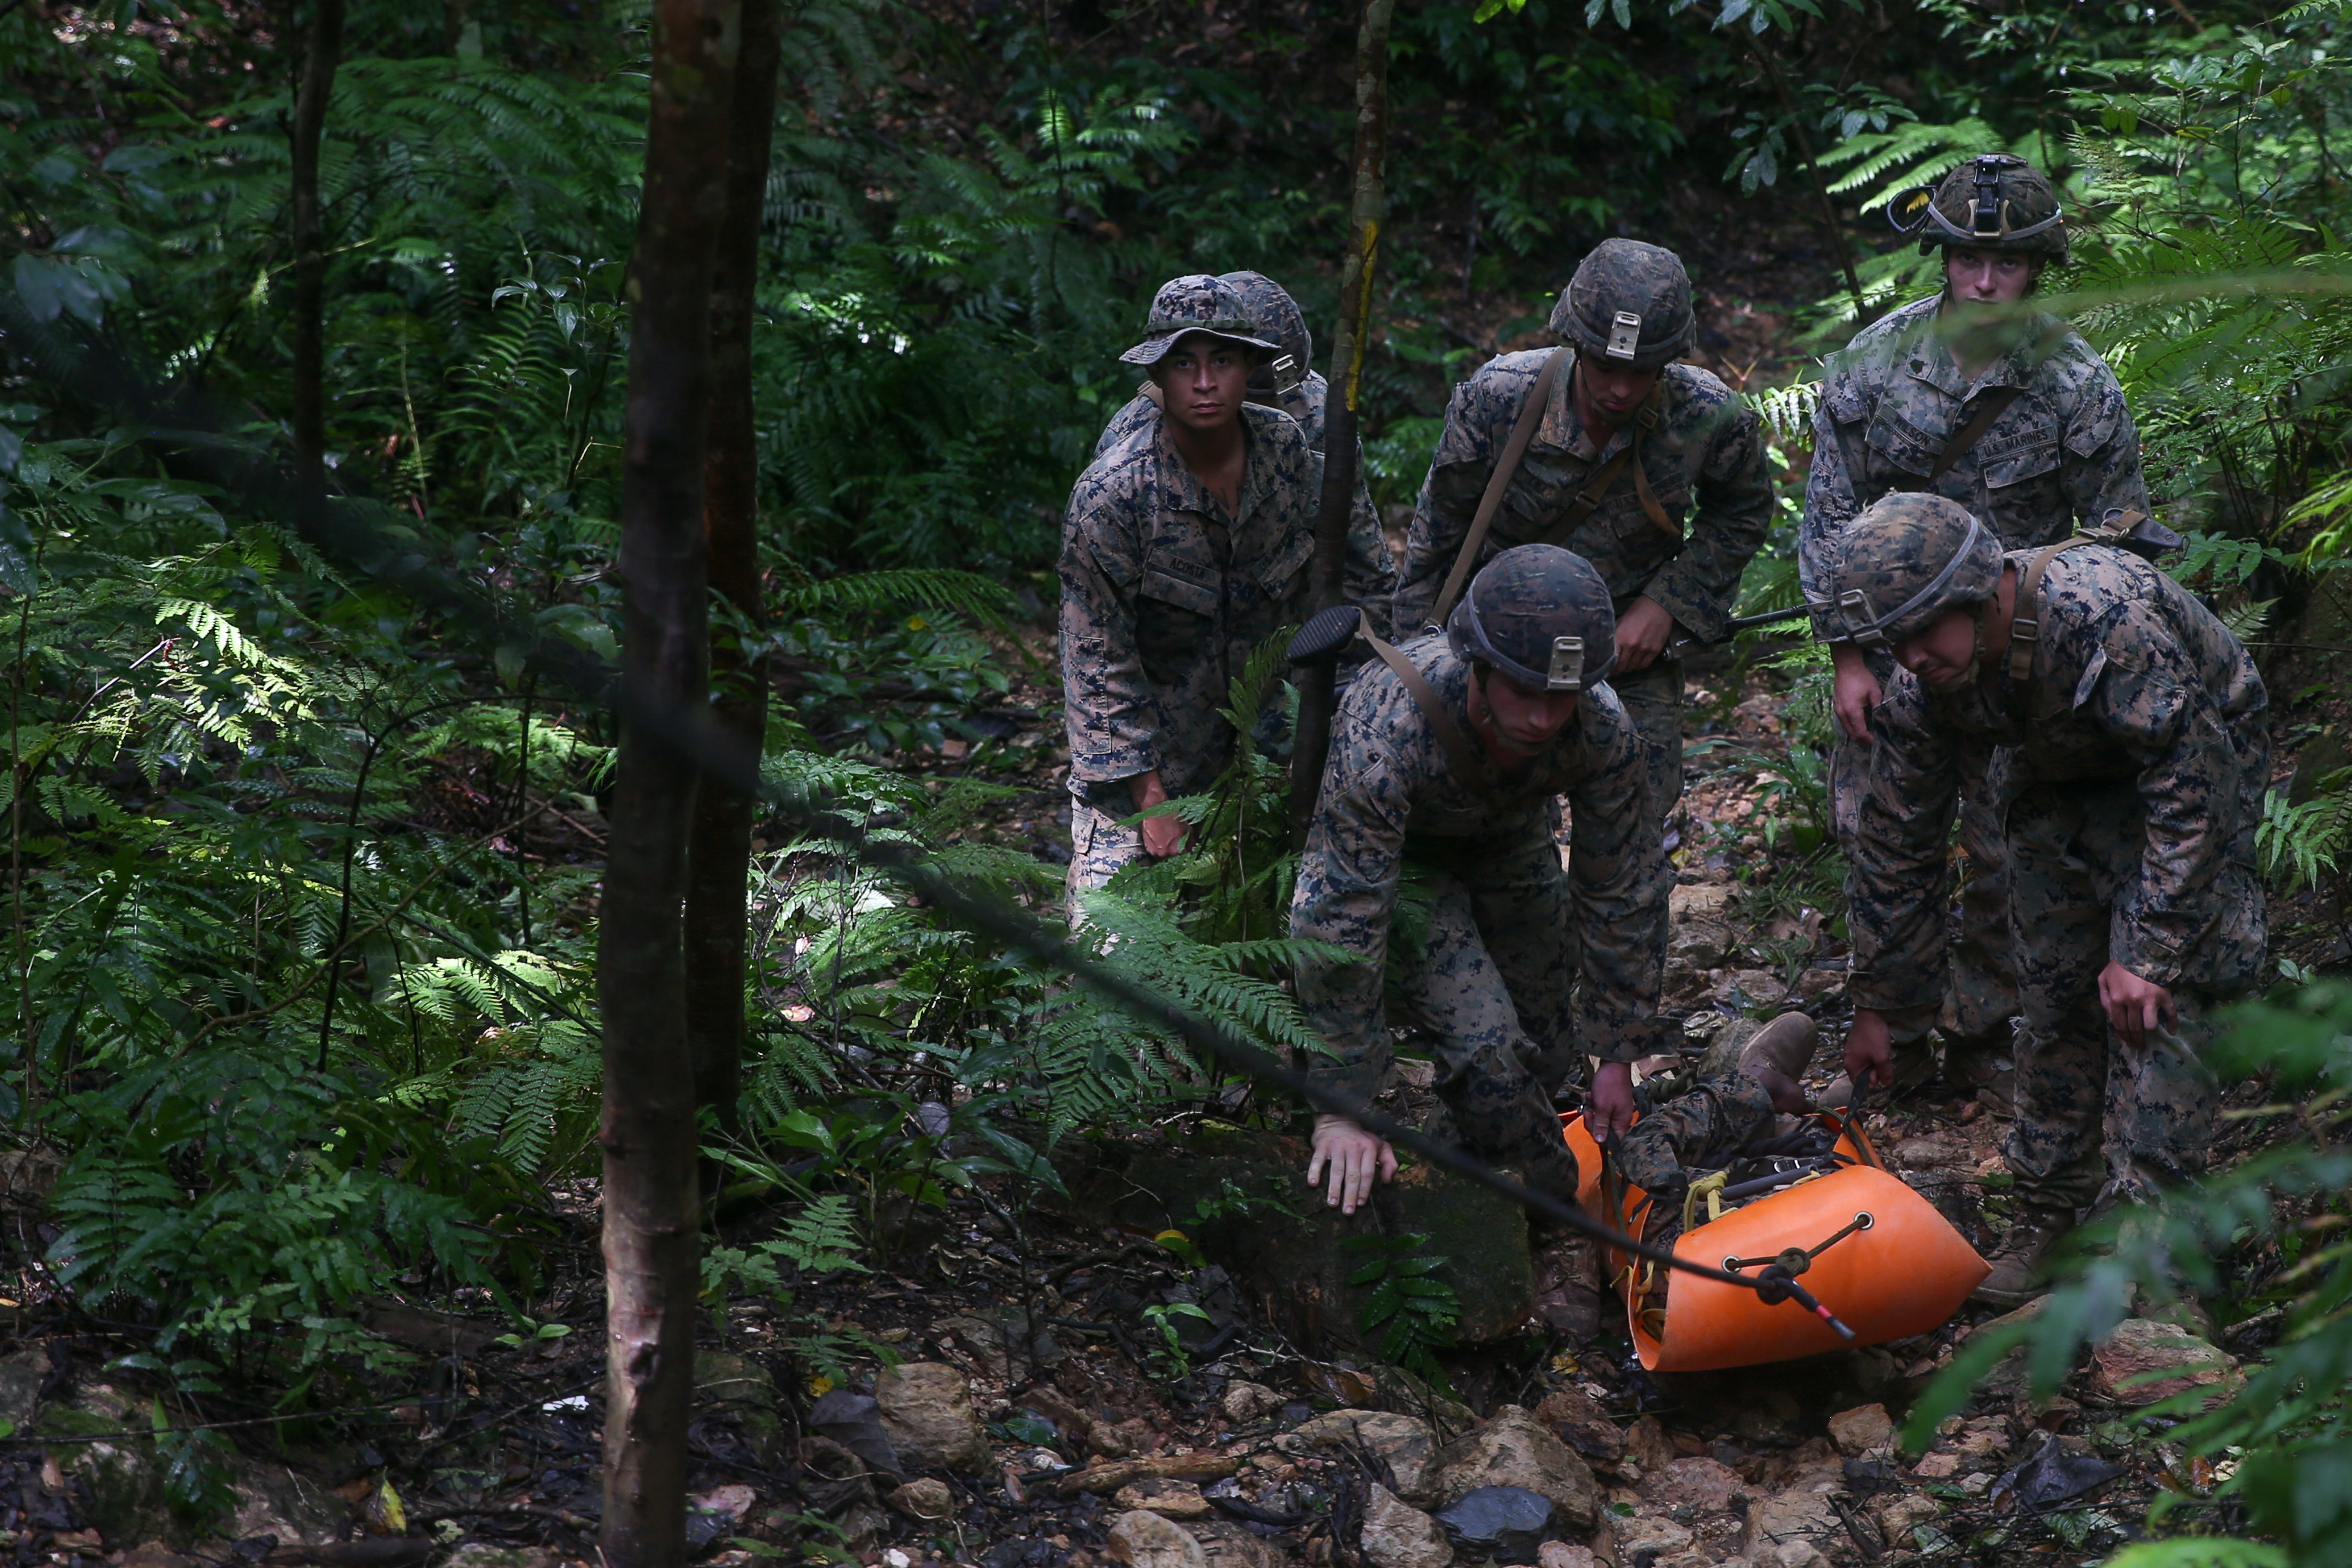 U.S. Marines with 1st Battalion, 3rd Marine Regiment, 3rd Marine Division, undergo the Infantry Jungle Skills Course at the Jungle Warfare Training Center on Camp Gonsalves, Okinawa, Japan.